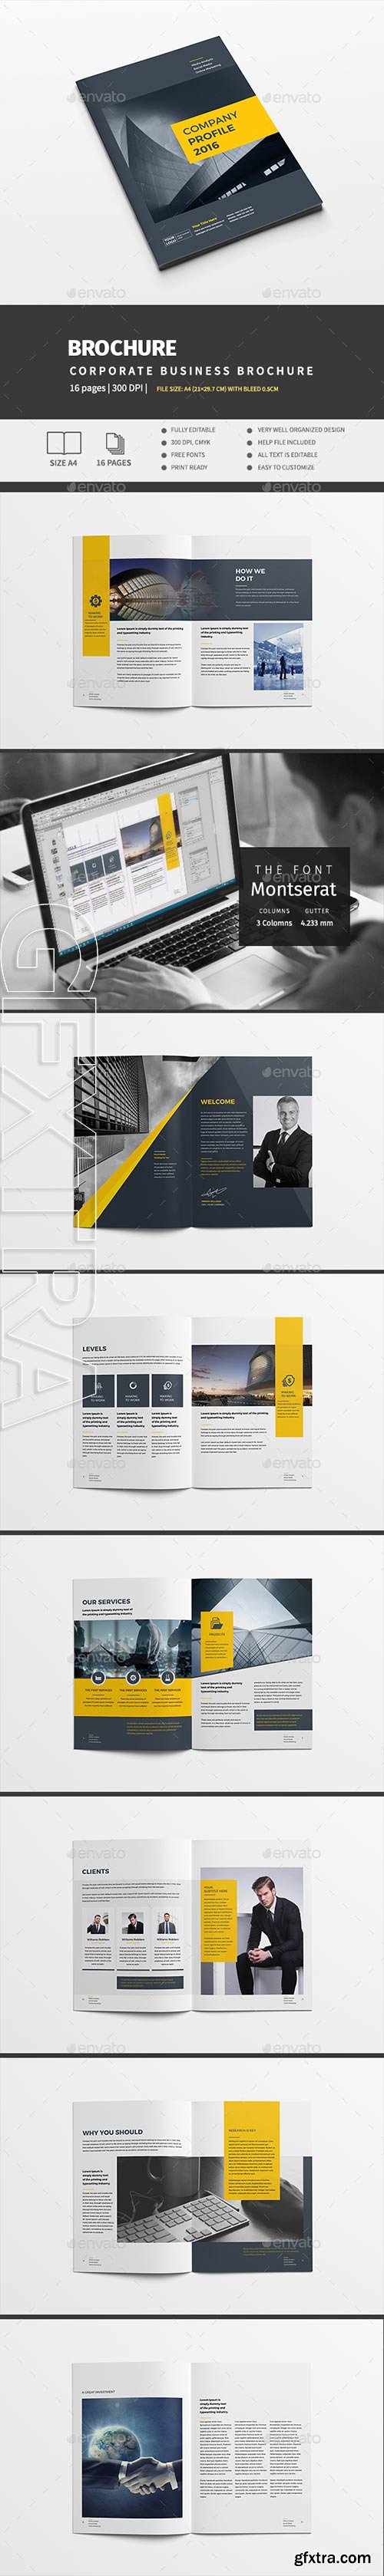 GraphicRiver - Corporate Business Brochure 16 Pages A4 16341812